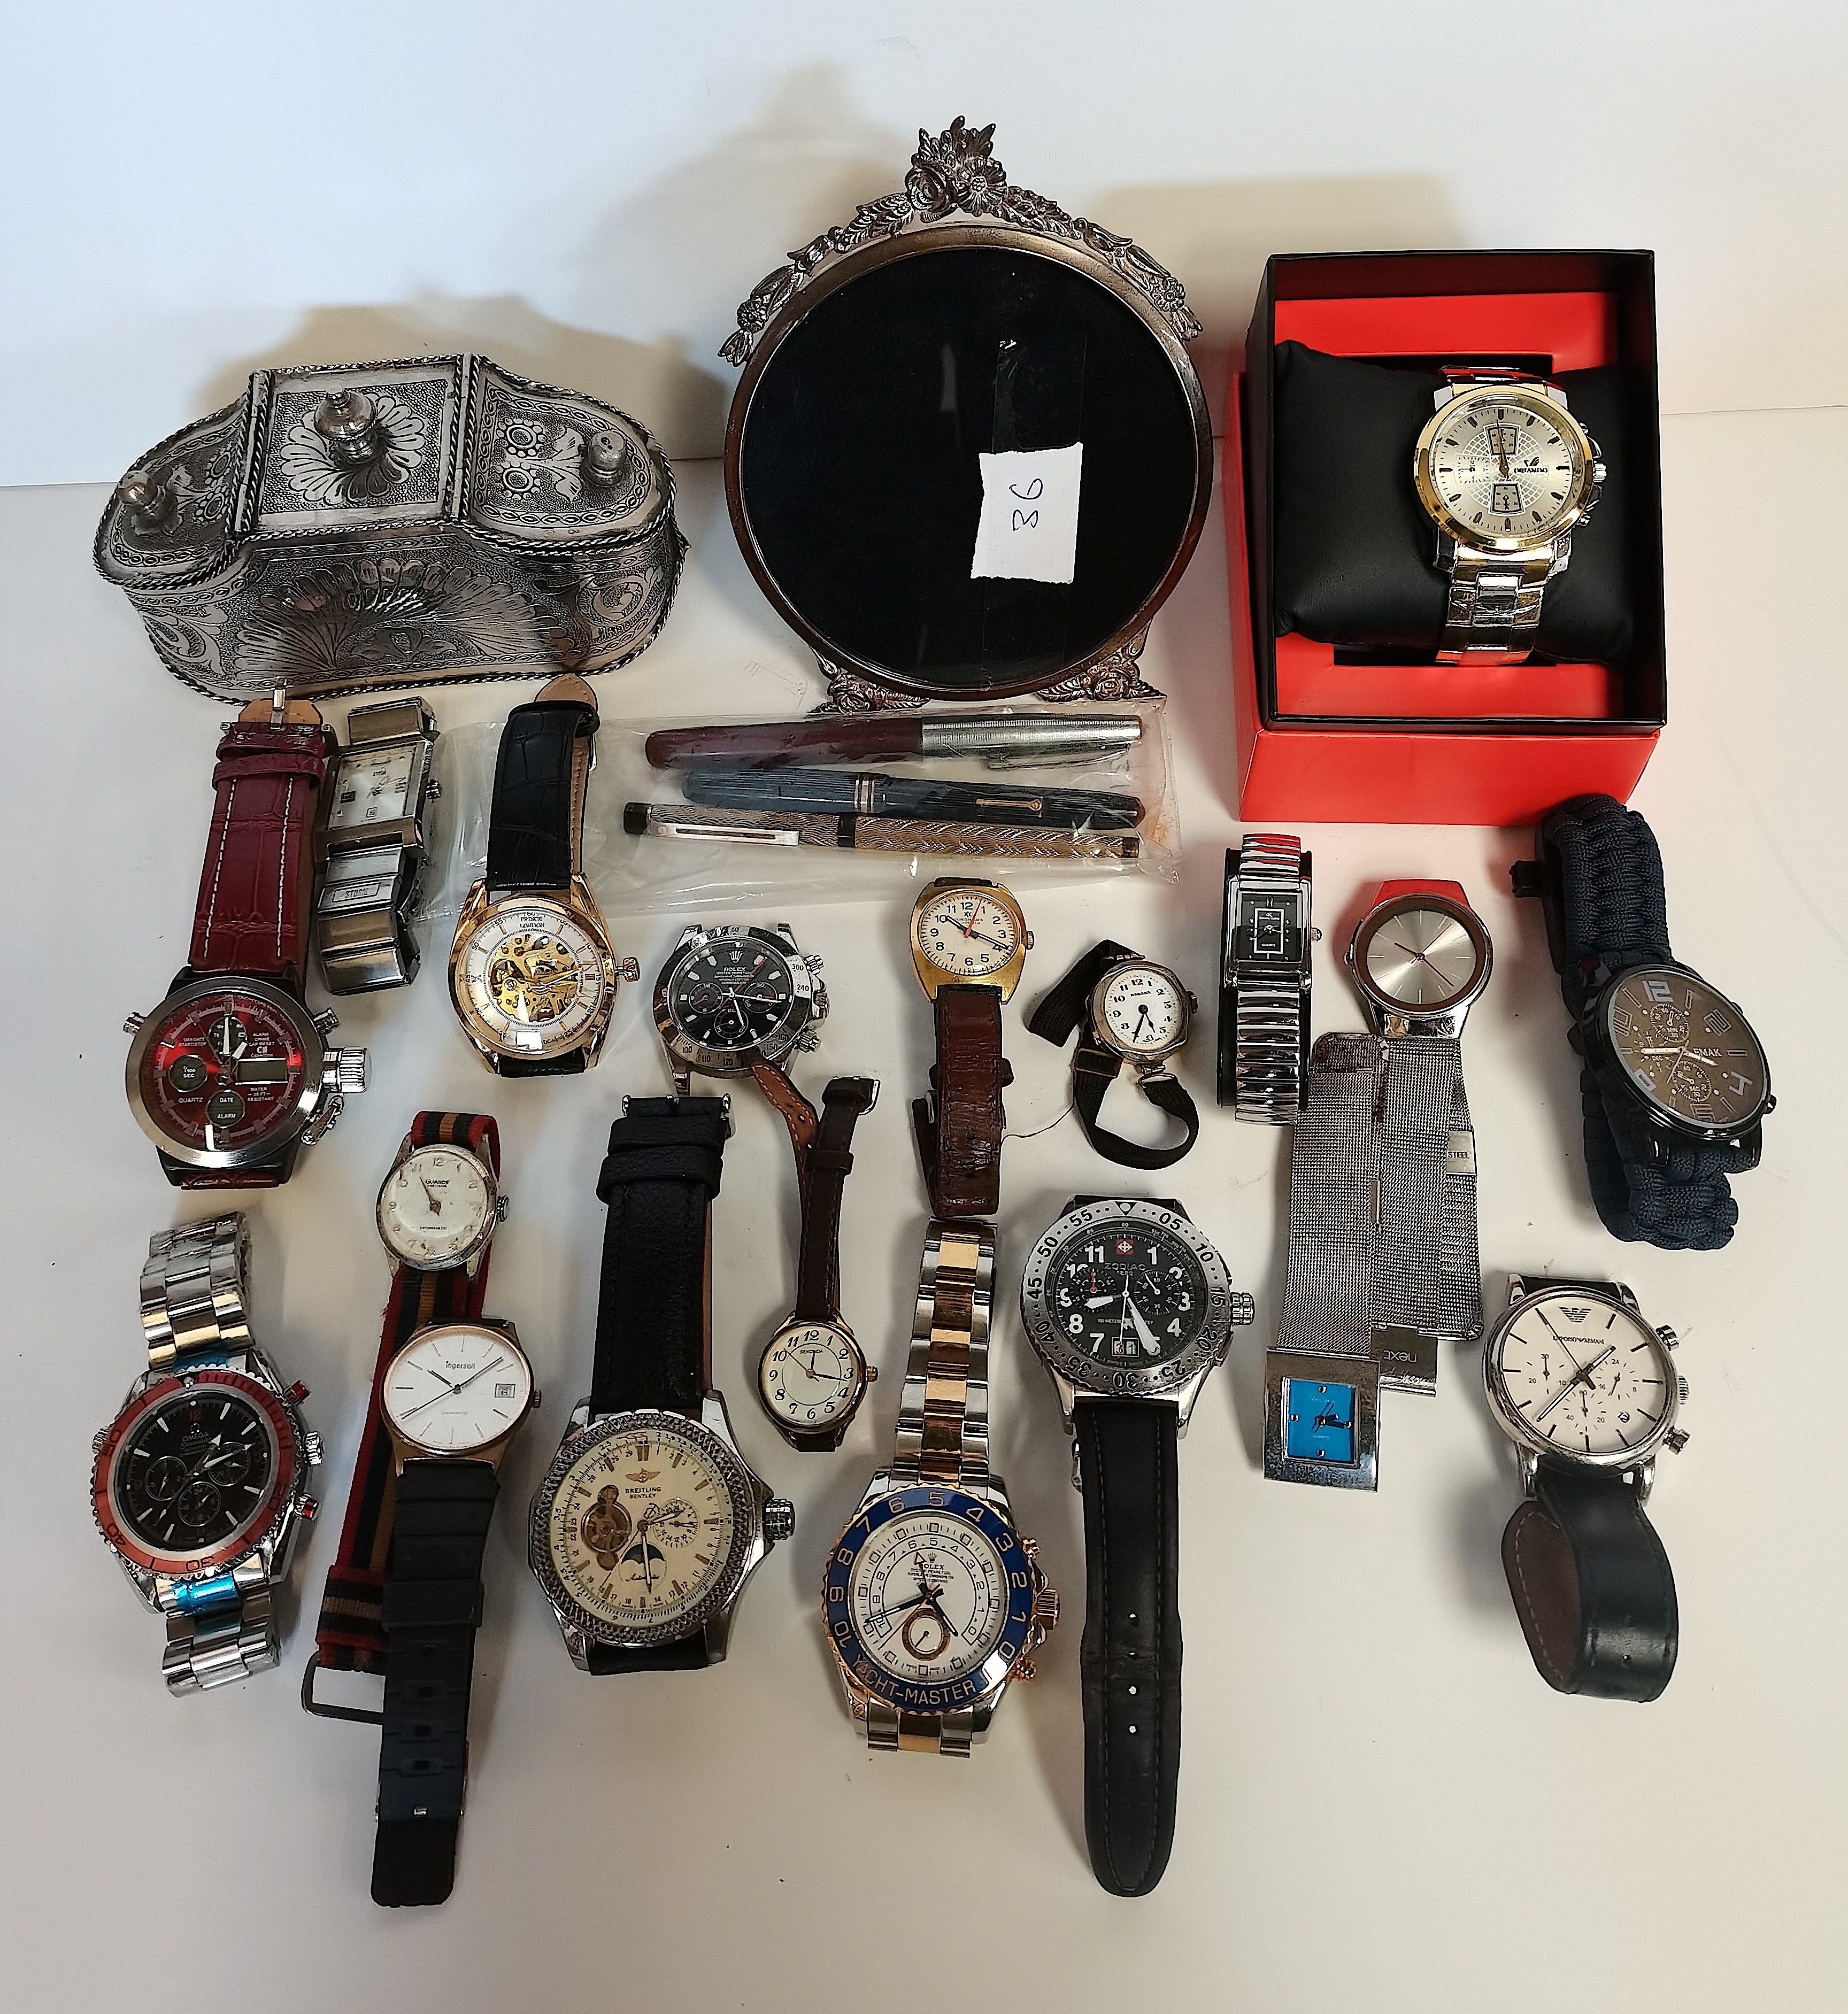 Watches, pens, photo frame etc